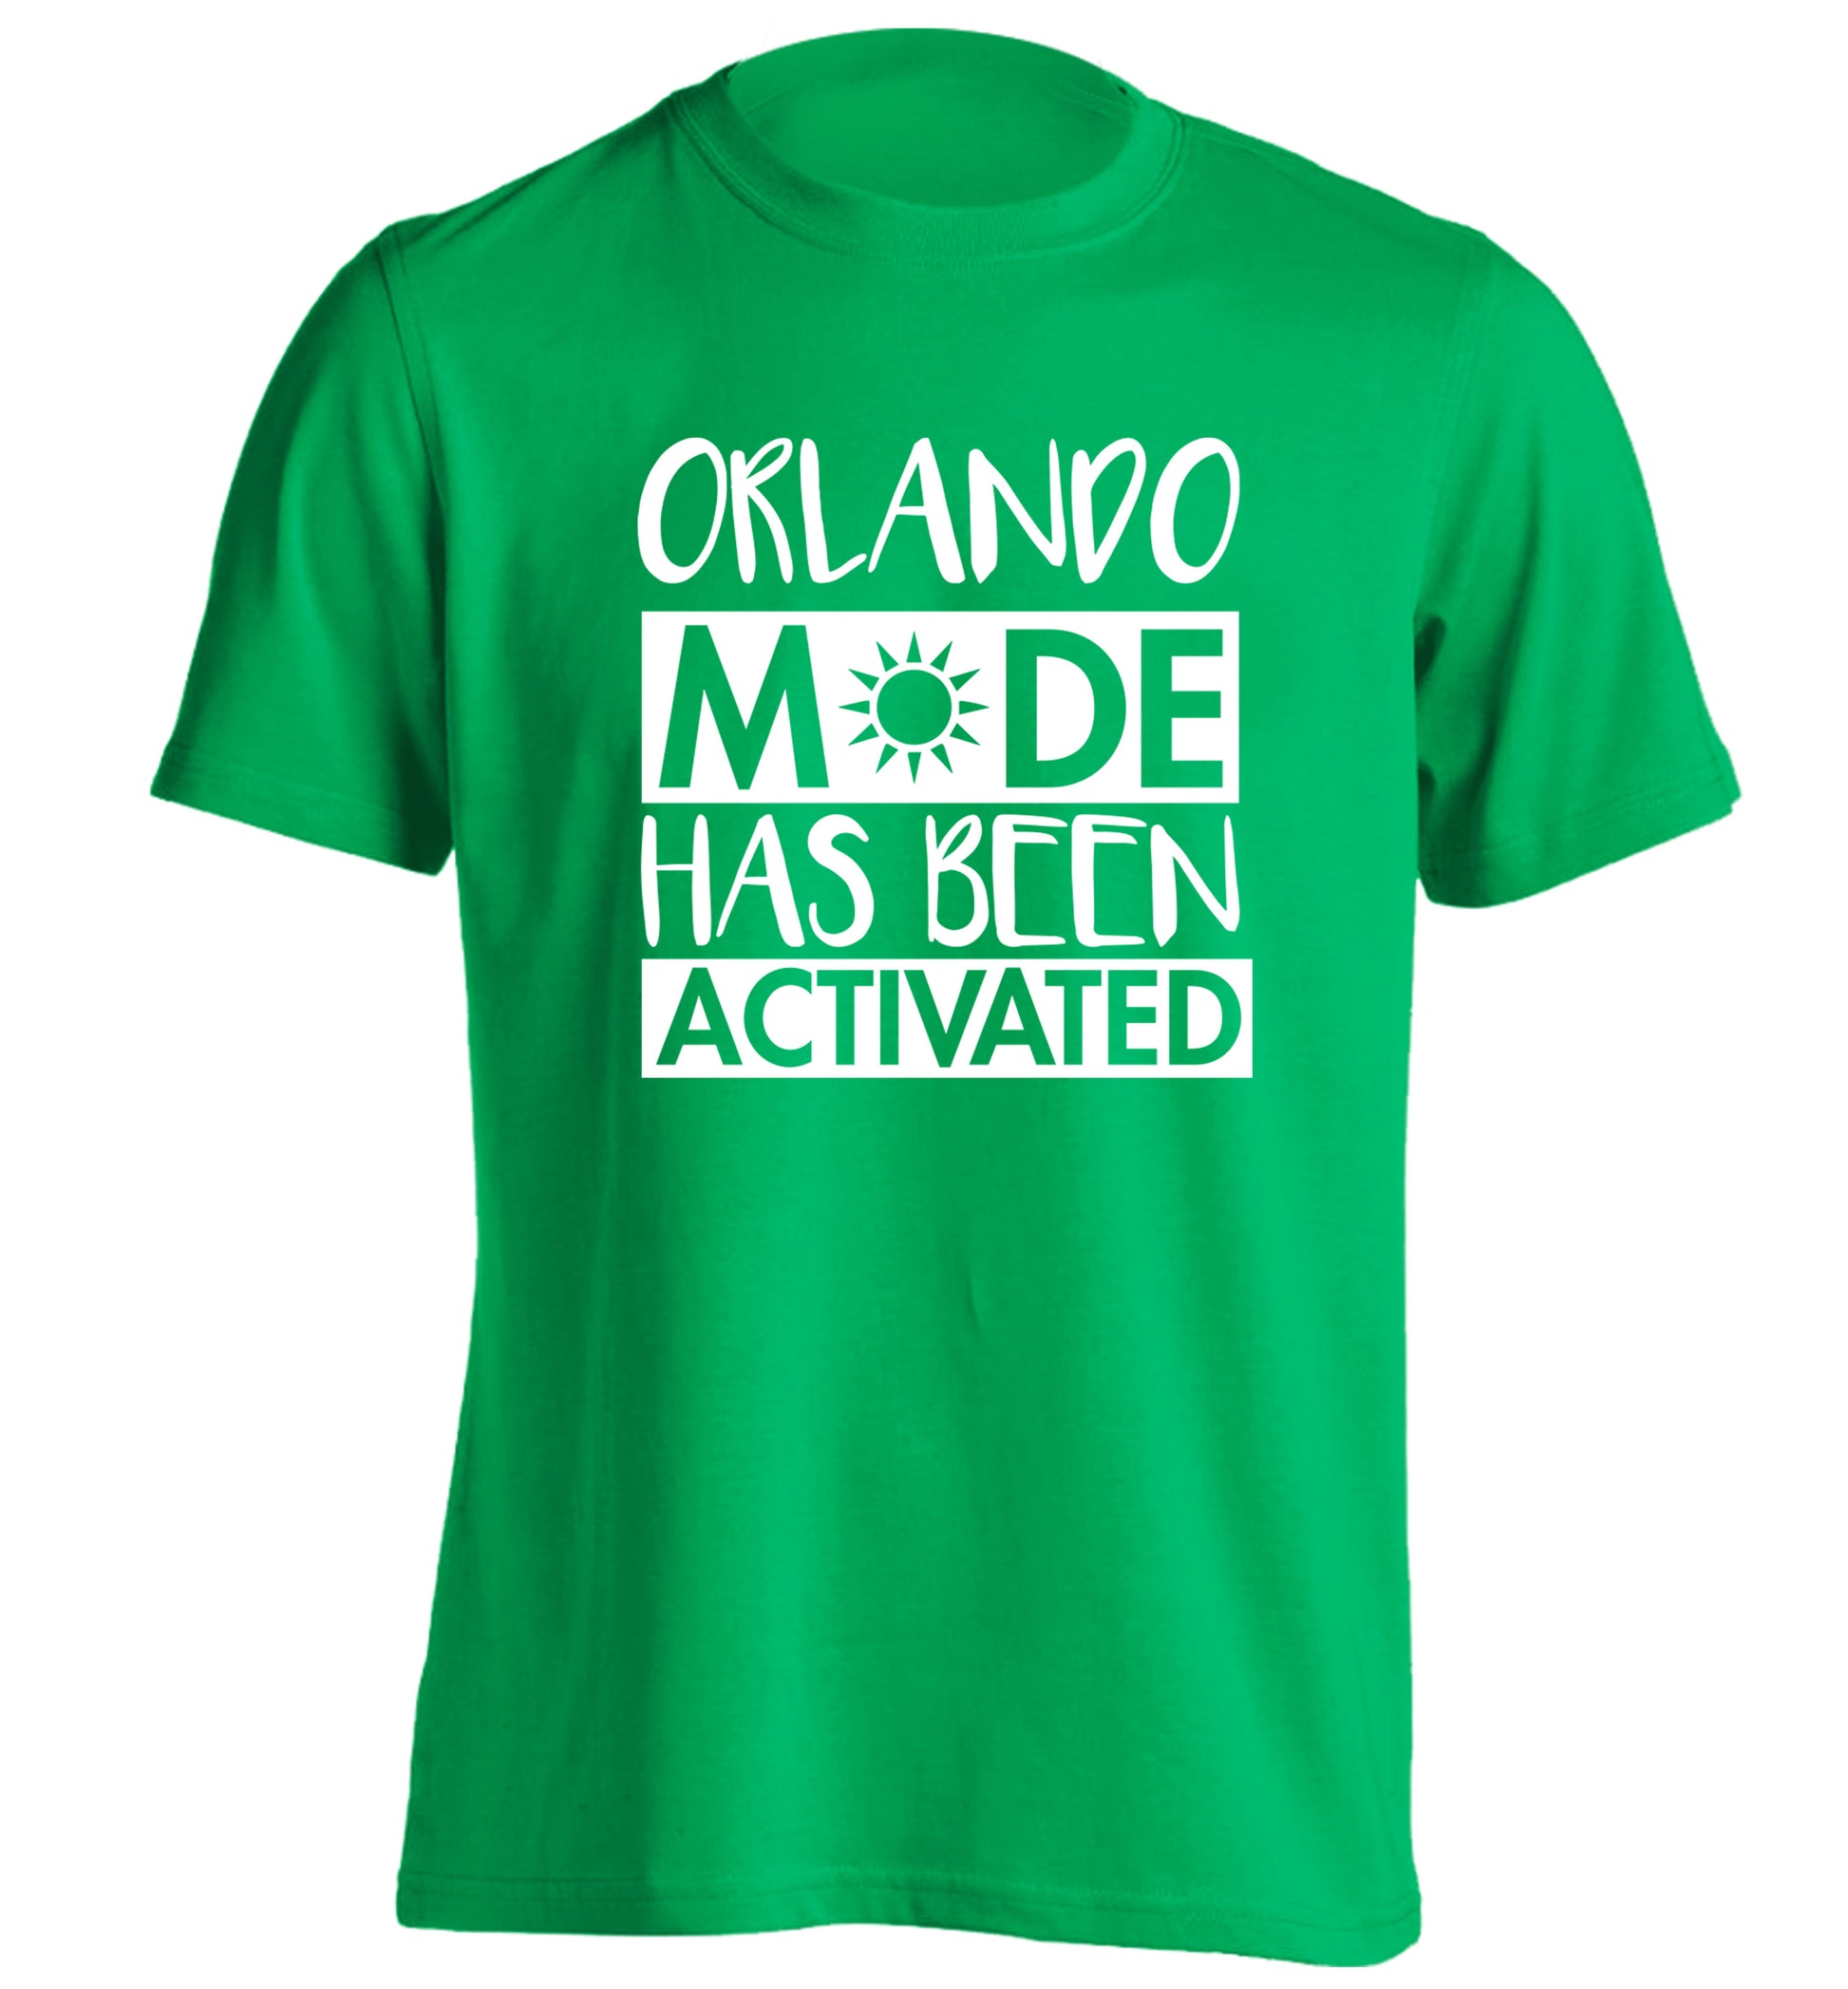 Orlando mode has been activated adults unisex green Tshirt 2XL